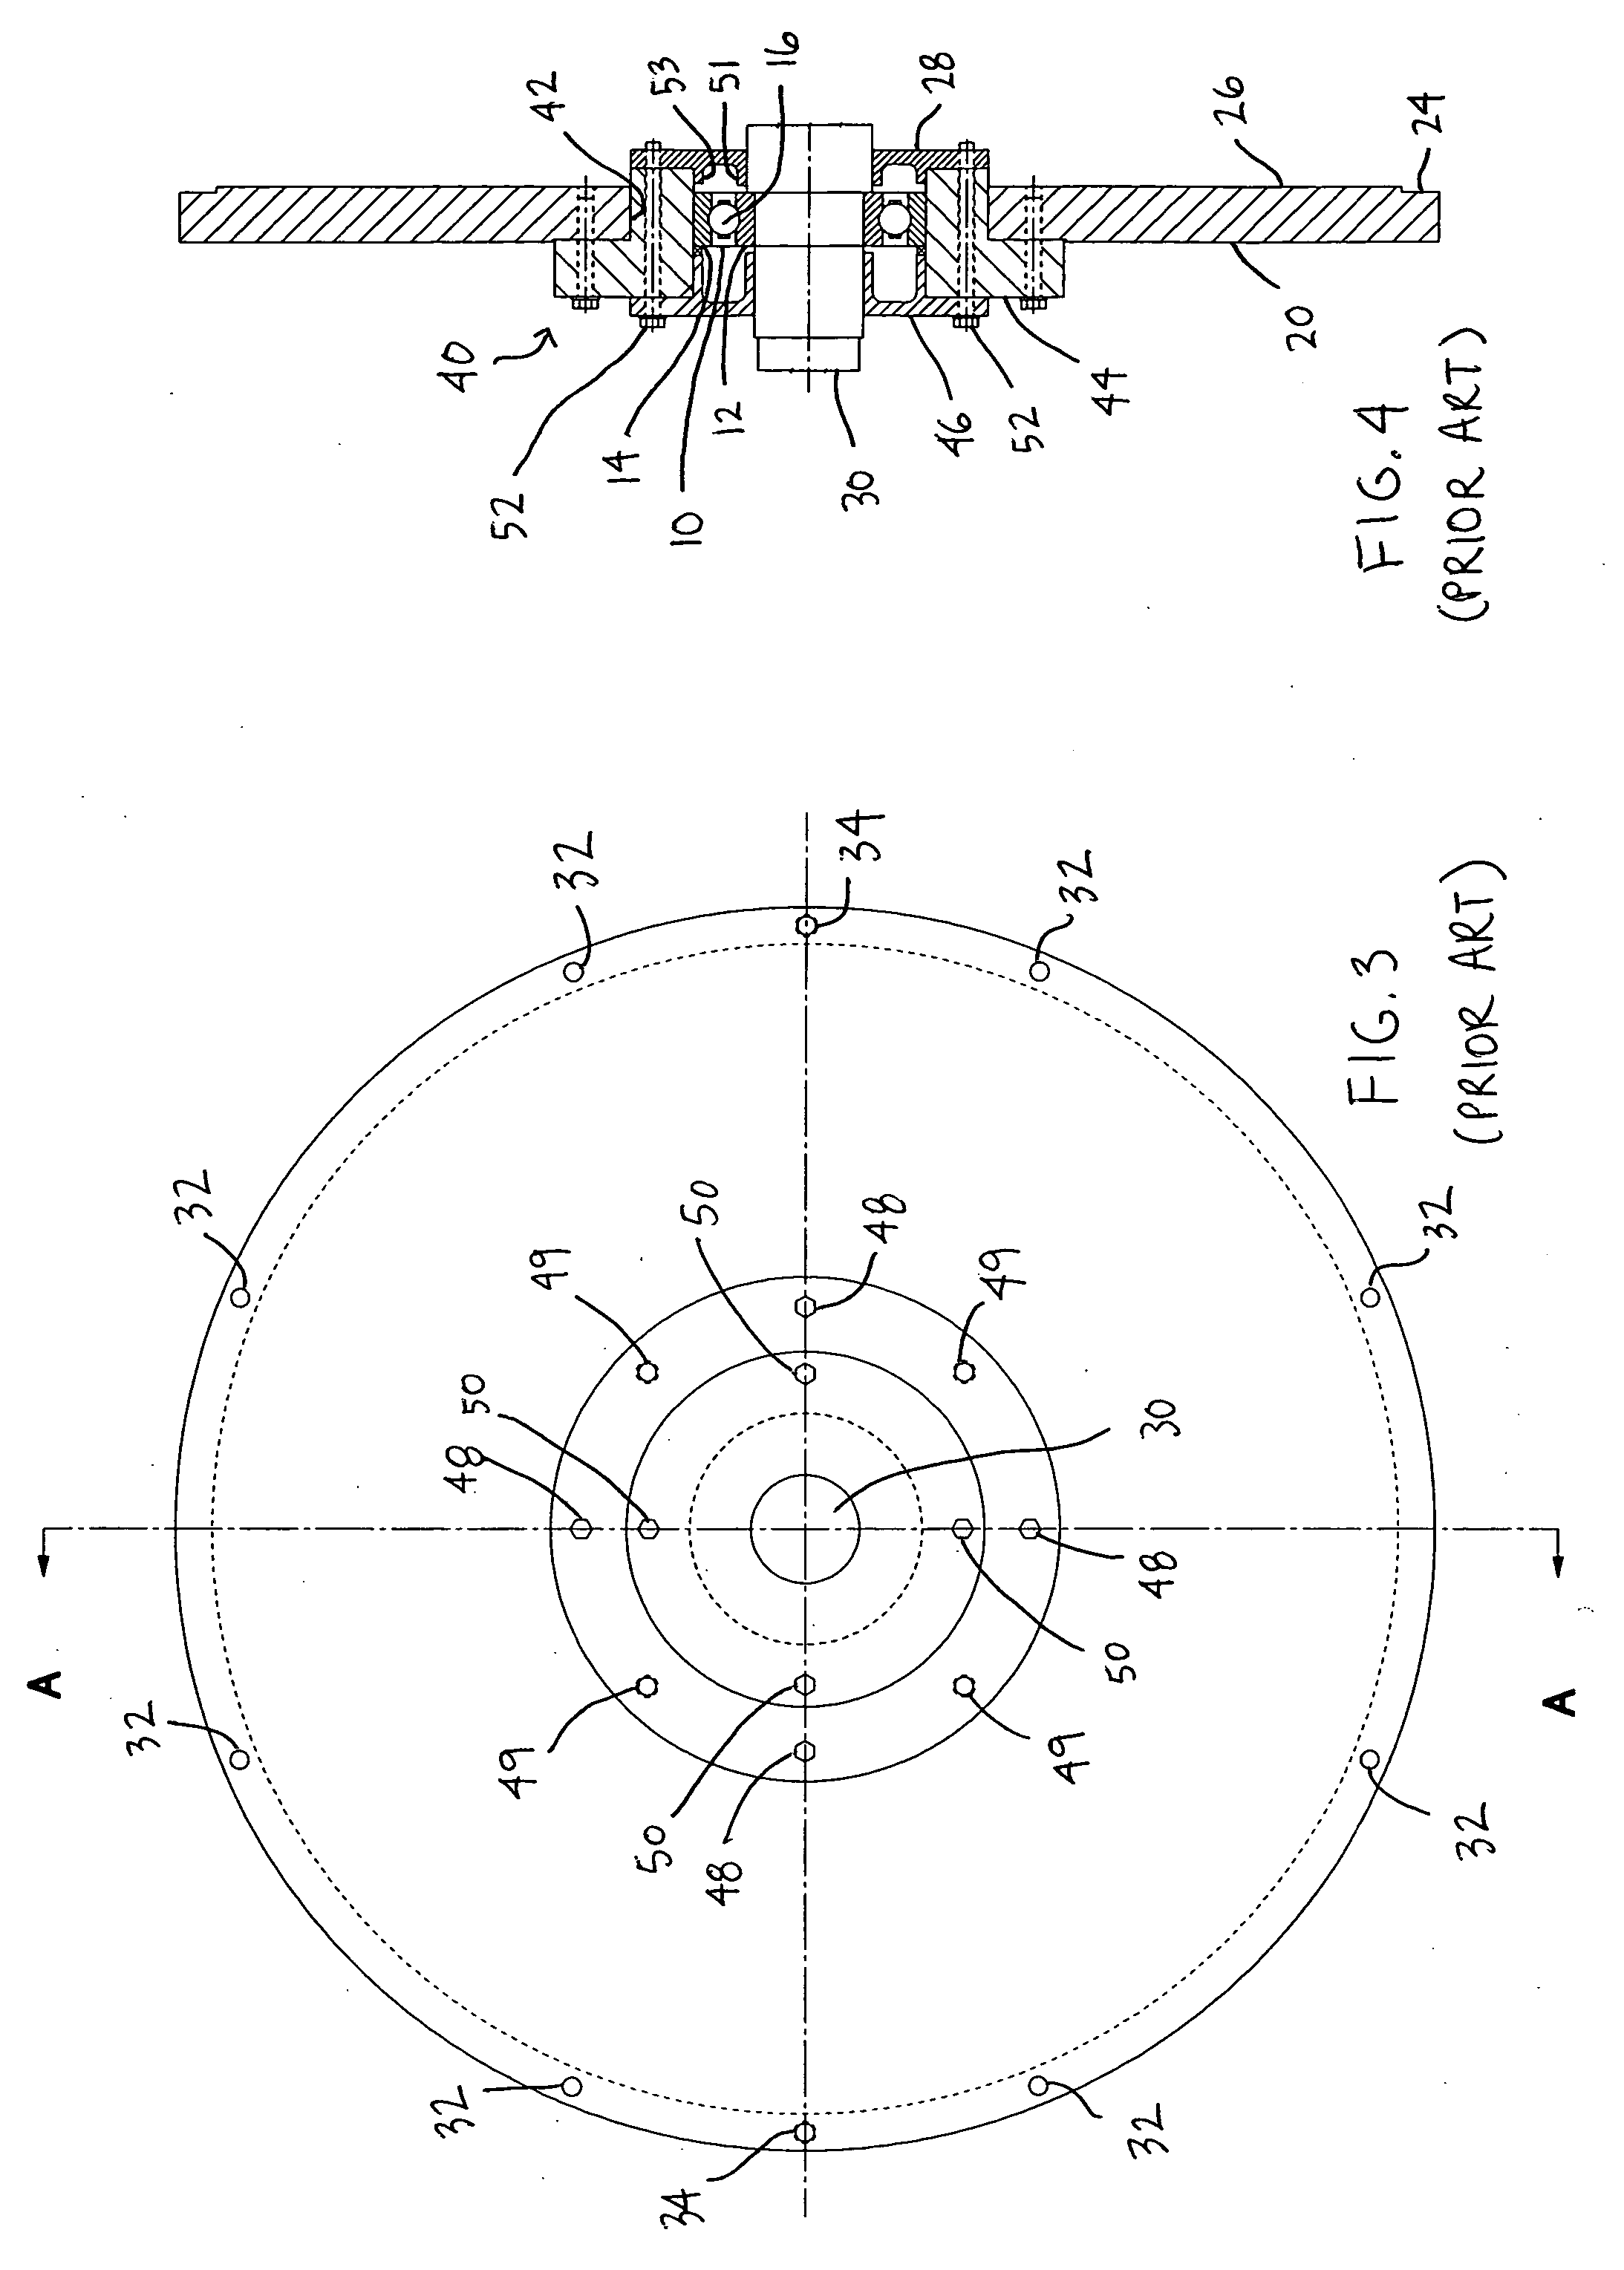 Load distribution devices and insulated bearing assemblies